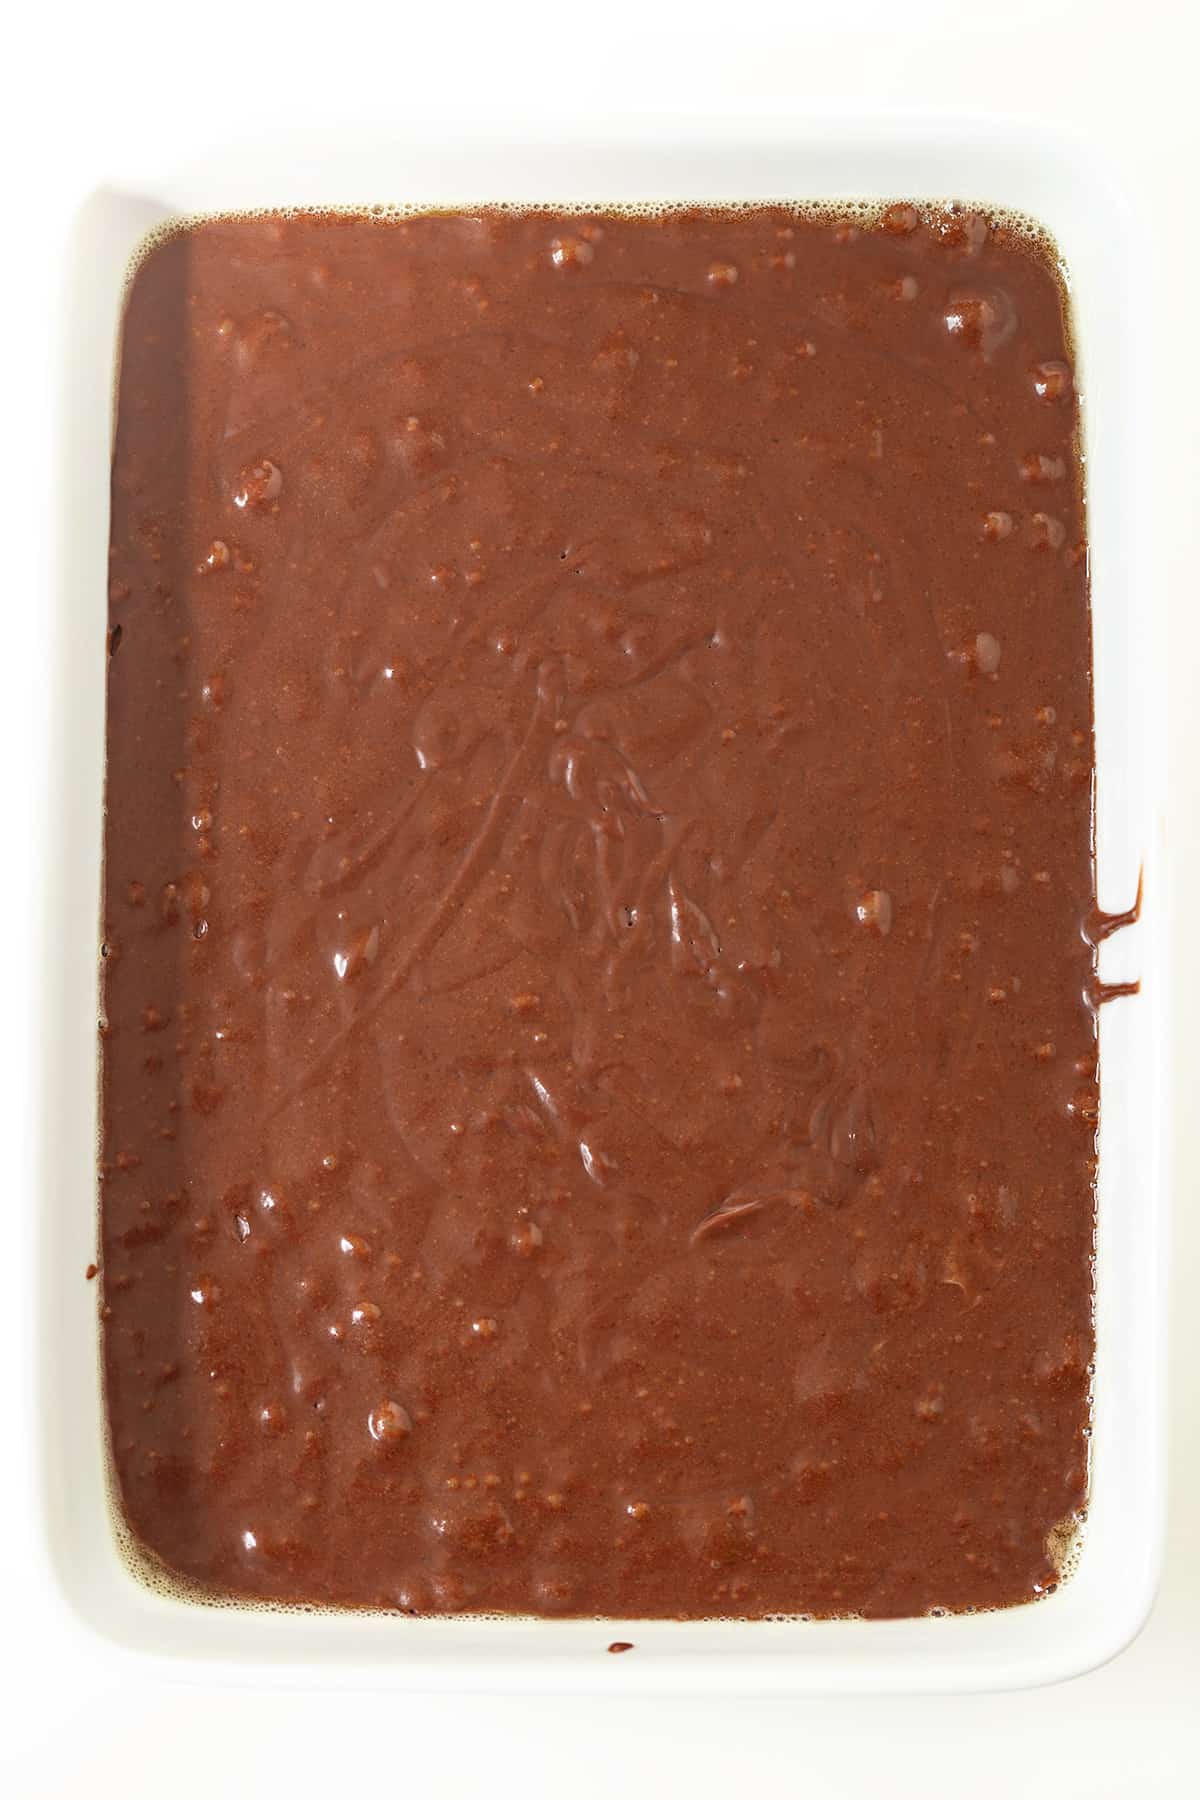 A square of chocolate stout cake on a white surface.